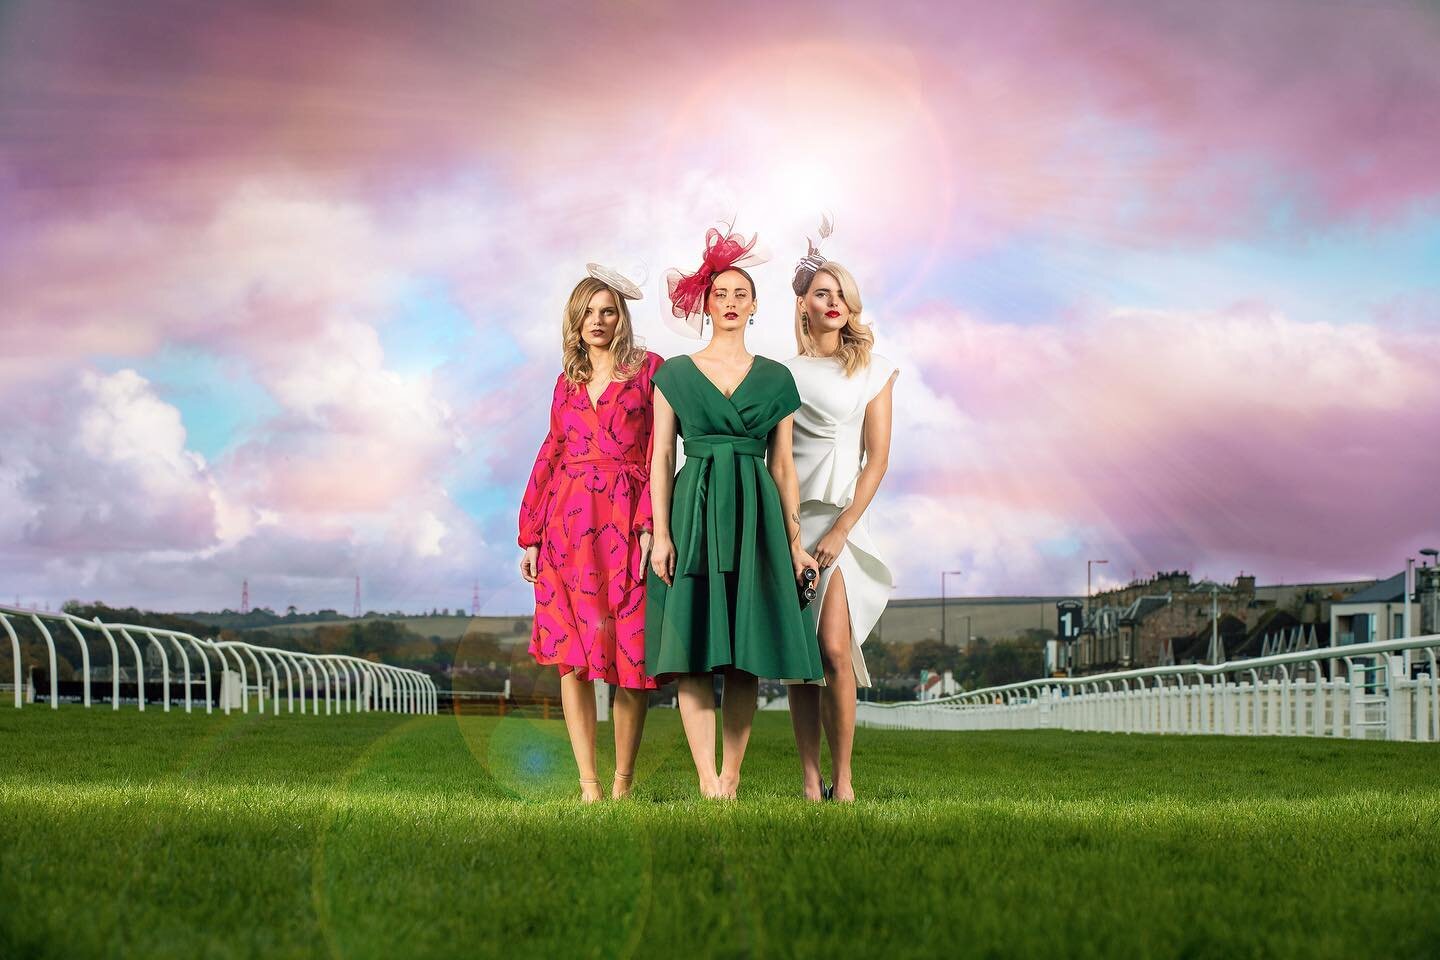 So here it is. On a freezing cold day in November 2019 this was shot with a few of the very brave models from @coloursagency .

June has passed and therefore so has the time of the beginning of Summer Vibes and Ladies Day at the races.

This was to b